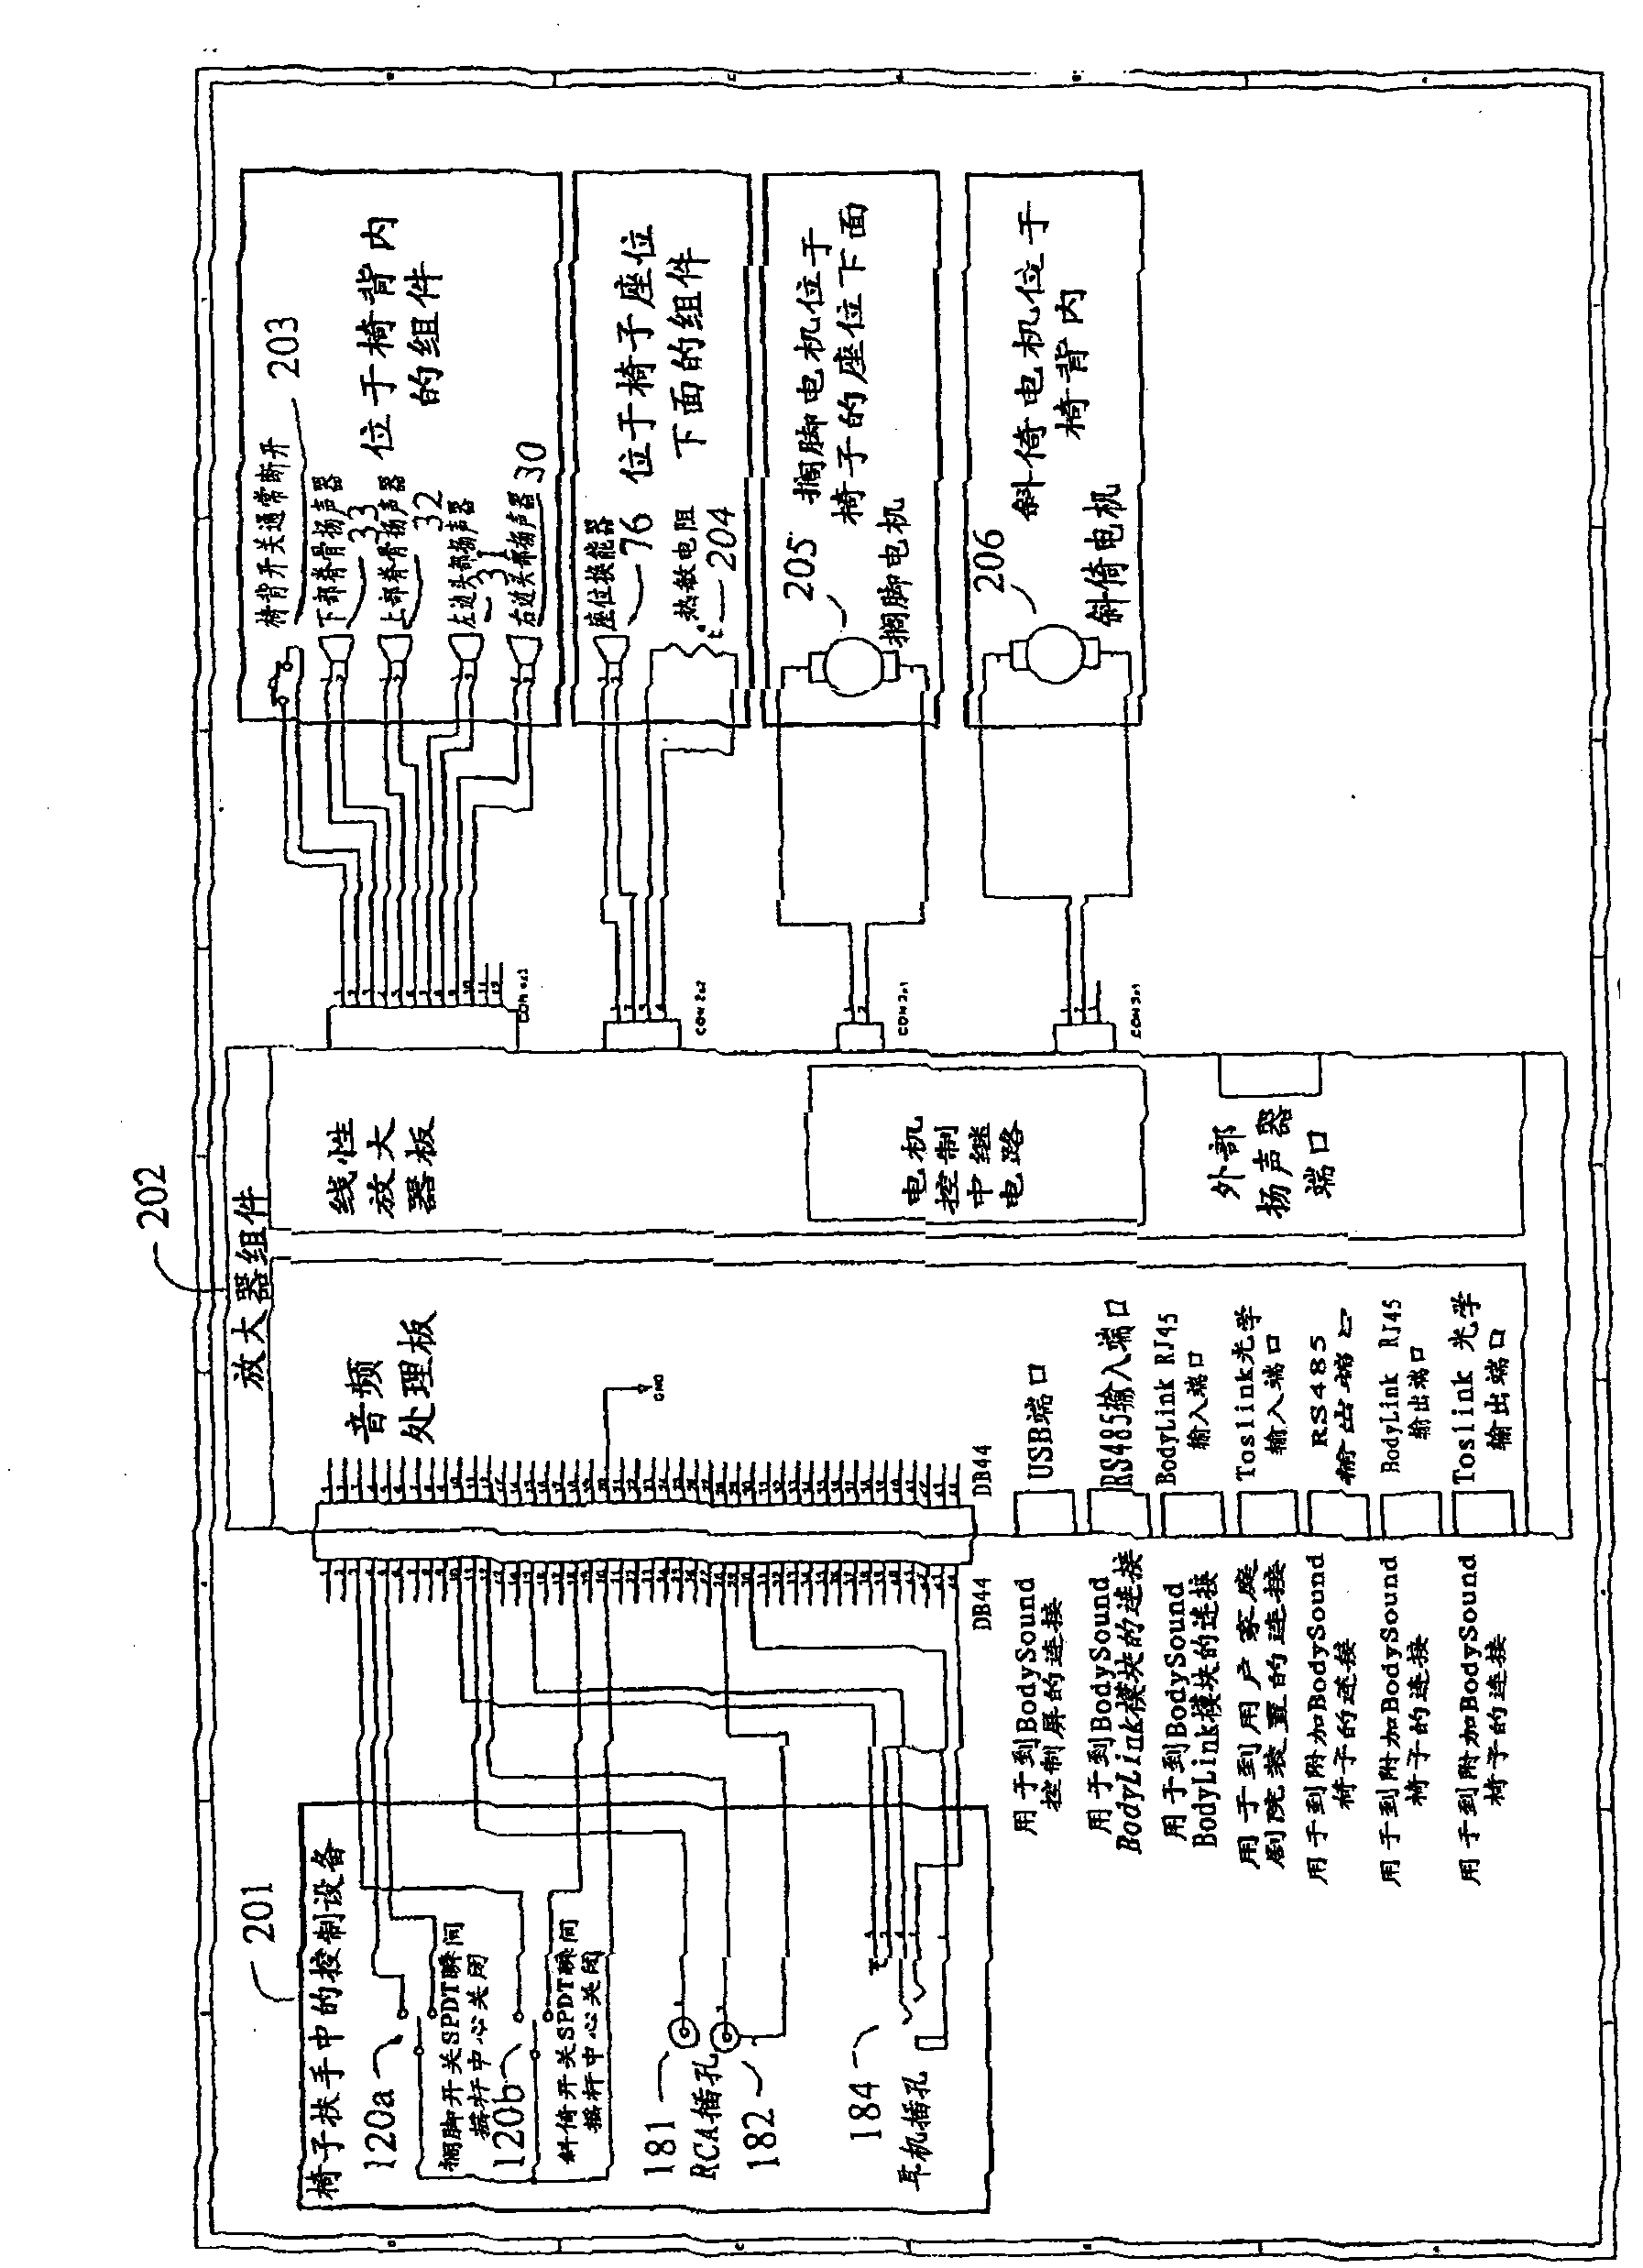 Chair and system for transmitting sound and vibration